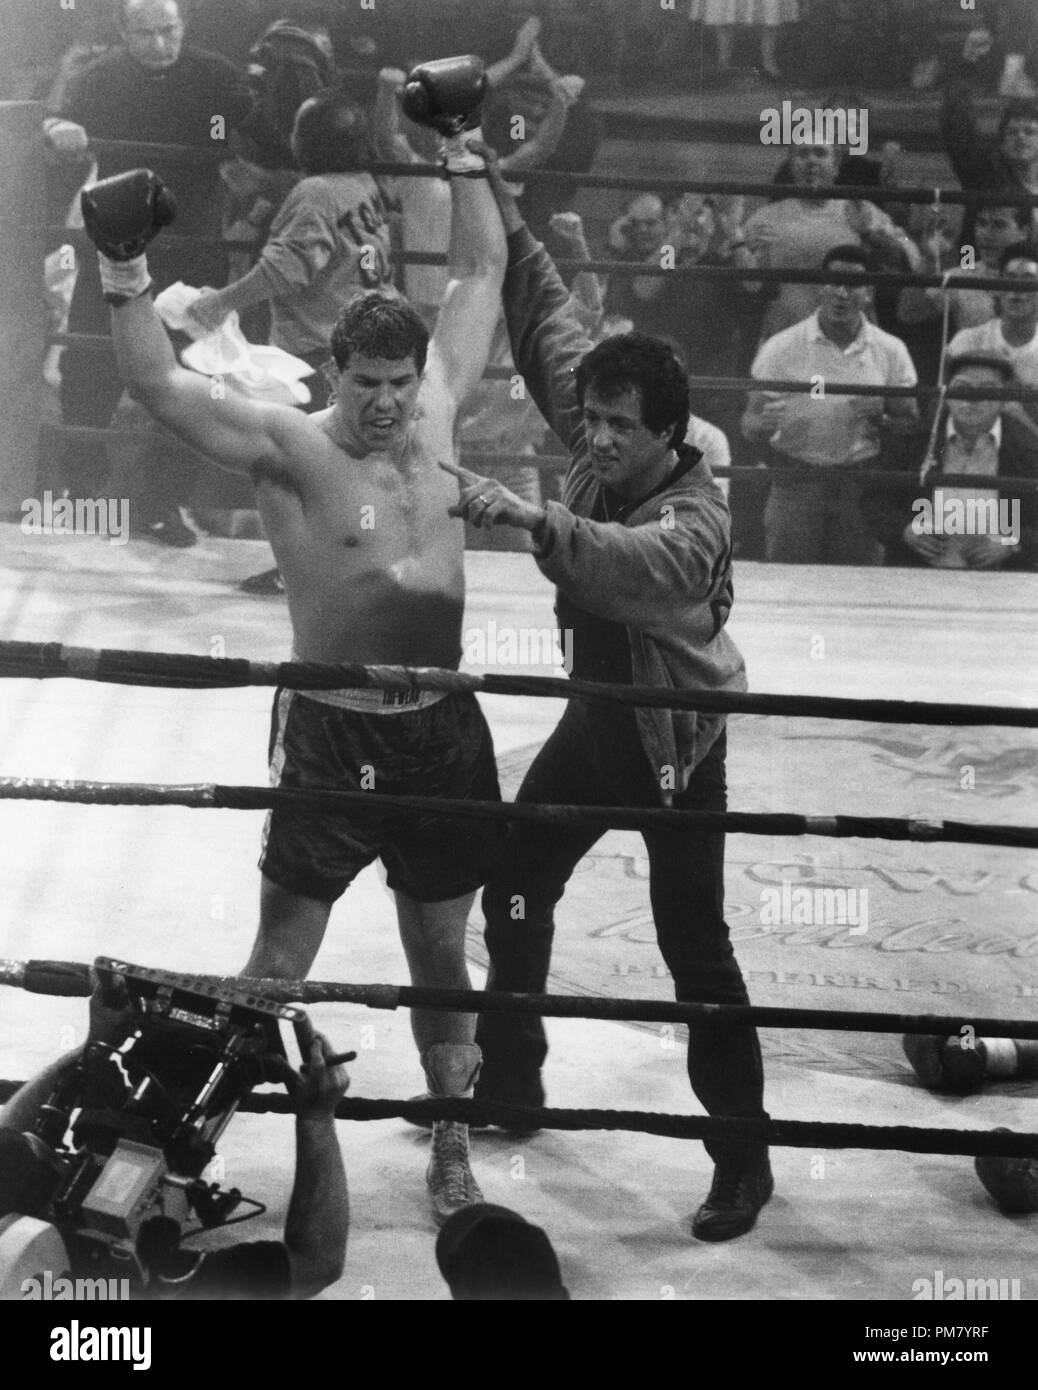 Film still or Publicity still from "Rocky V" Tommy Morrison, Sylvester Stallone © 1990 MGM  All Rights Reserved   File Reference # 31571093THA  For Editorial Use Only Stock Photo